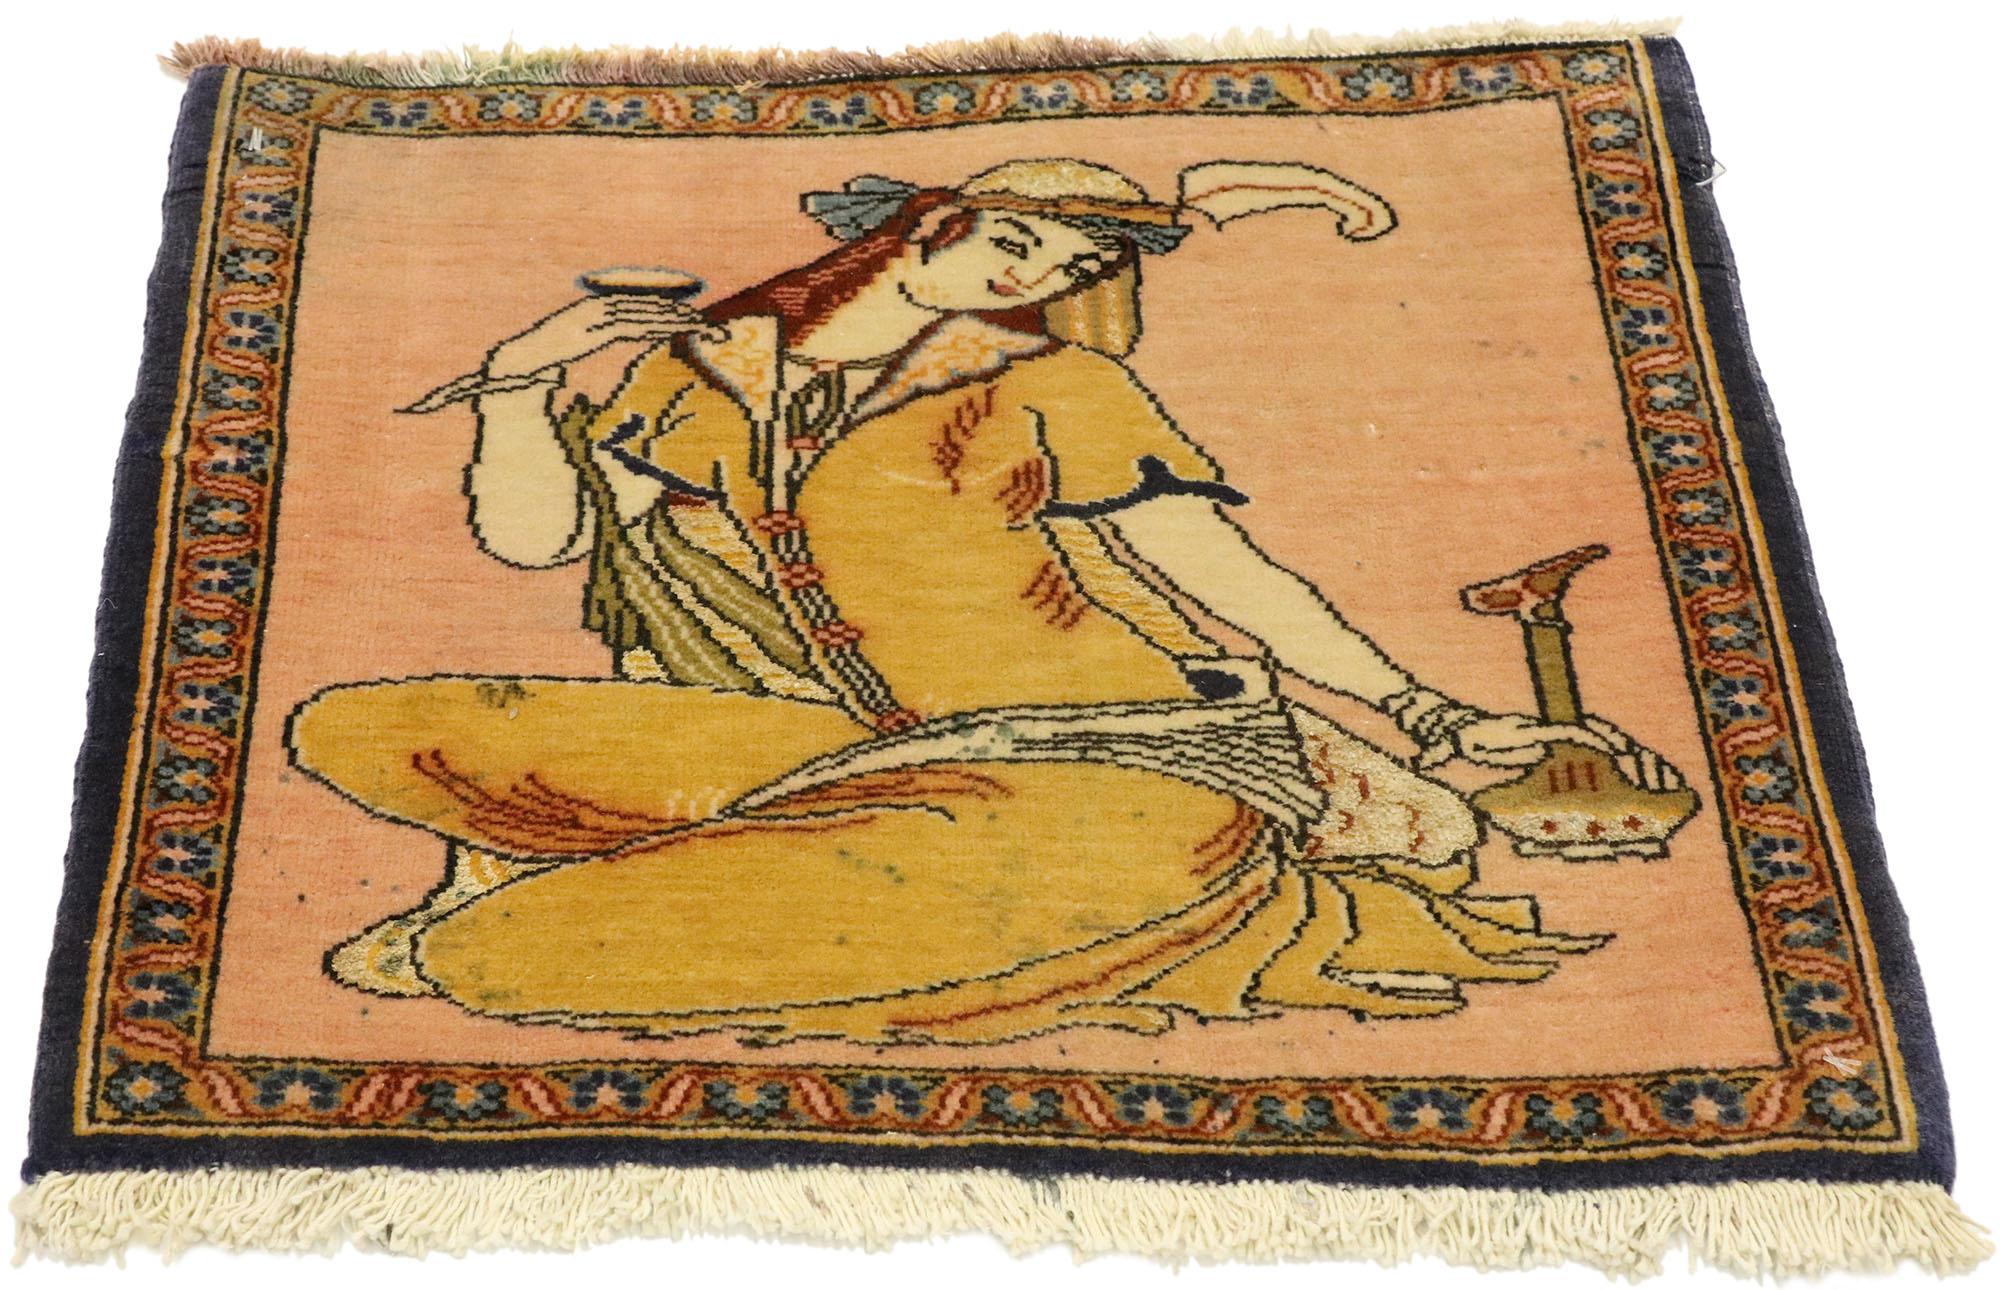 Modern Vintage Persian Khamseh Pictorial Rug with Dervish Scene, Persian Wall Hanging For Sale